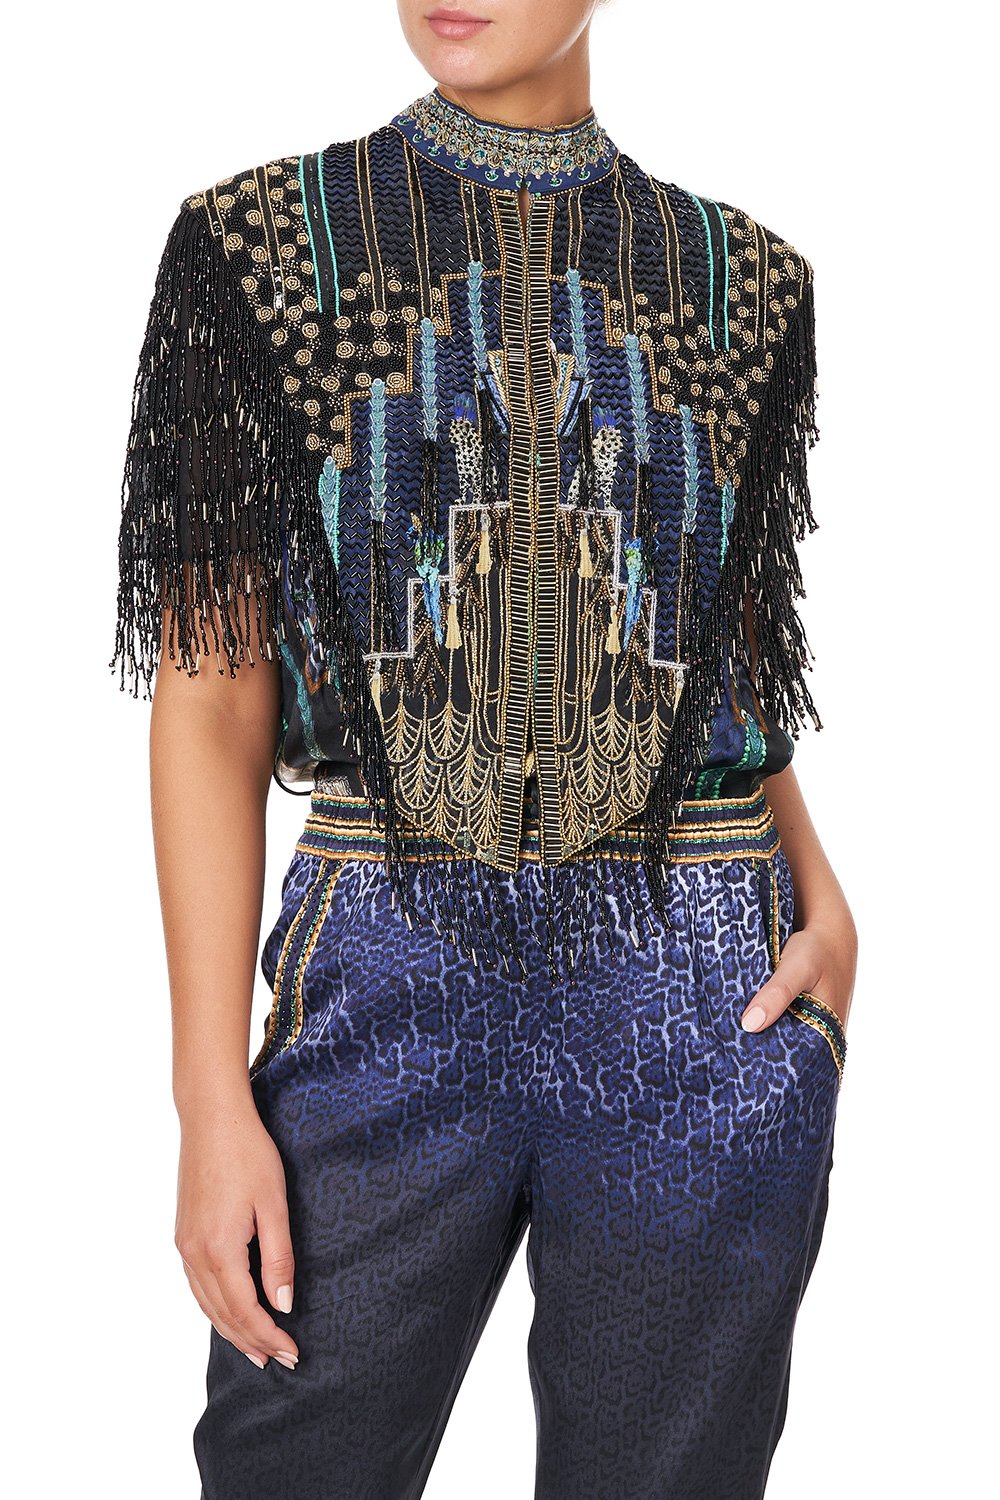 BEADED GILET DRIPPING IN DECO